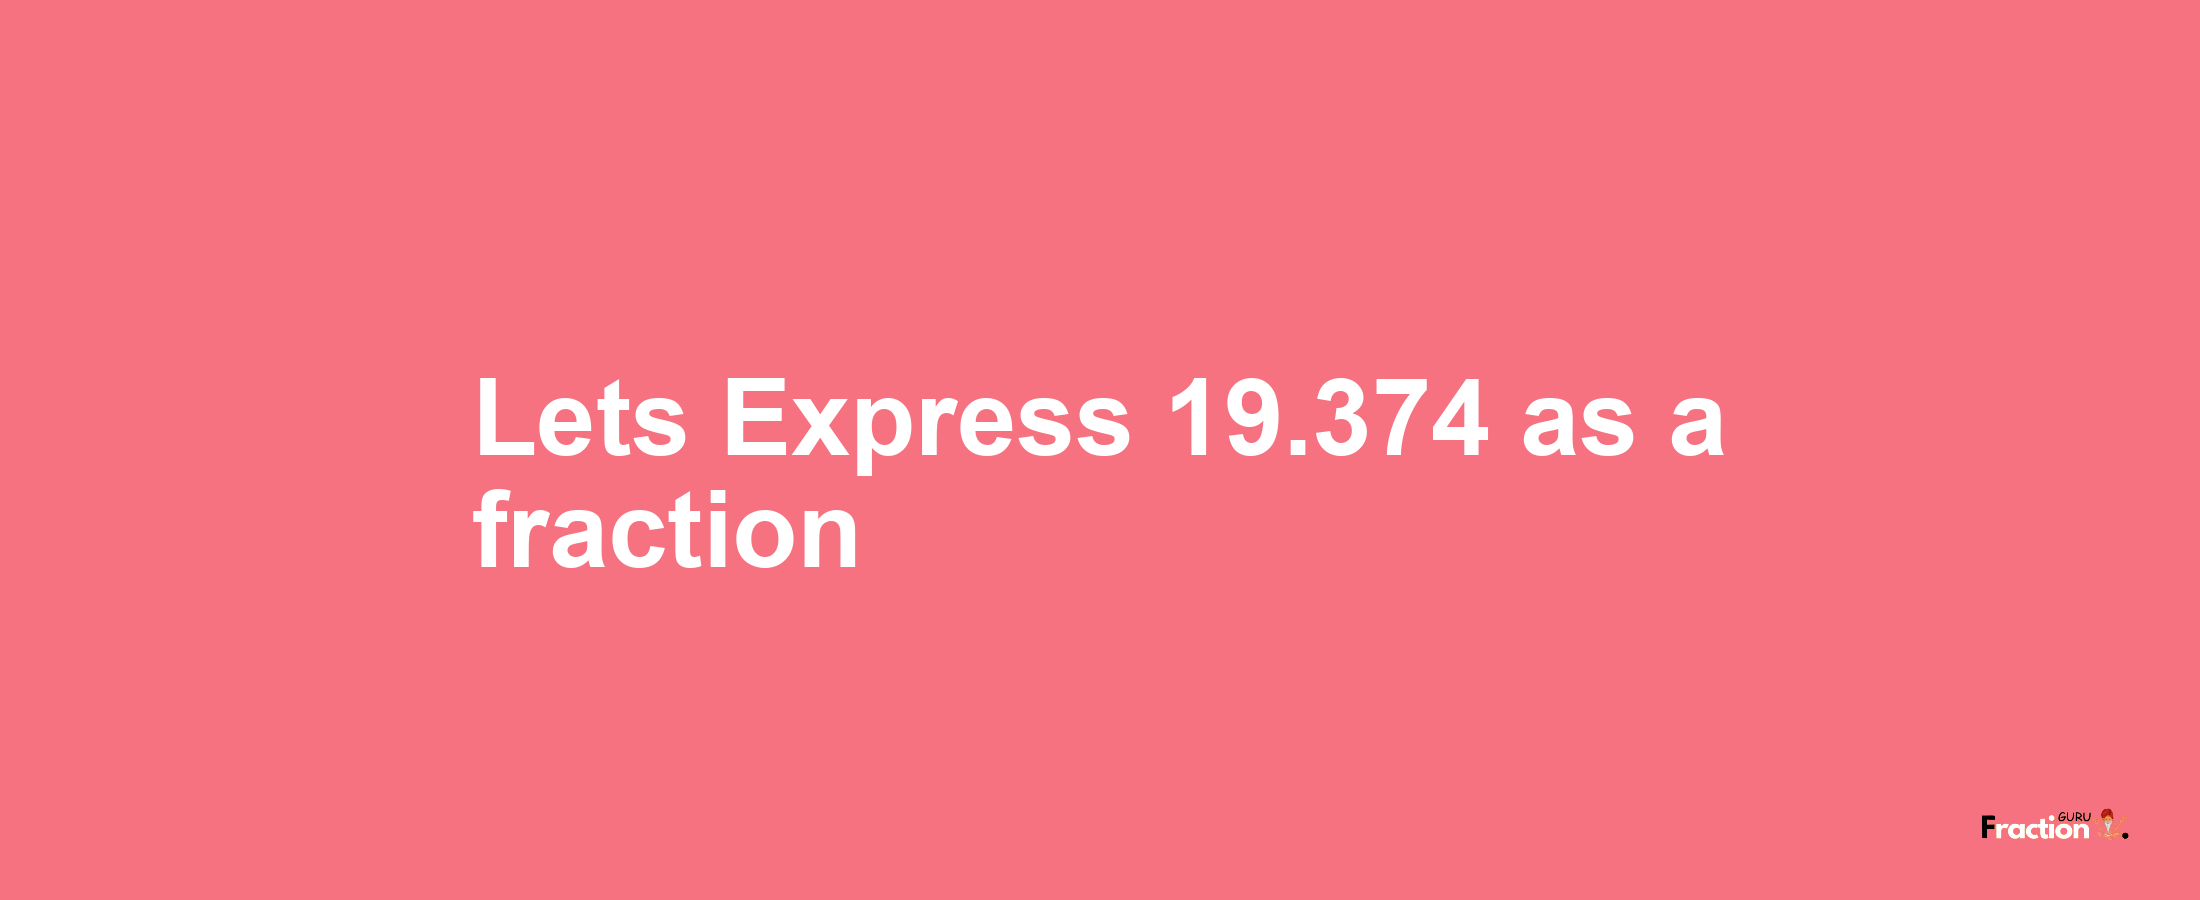 Lets Express 19.374 as afraction